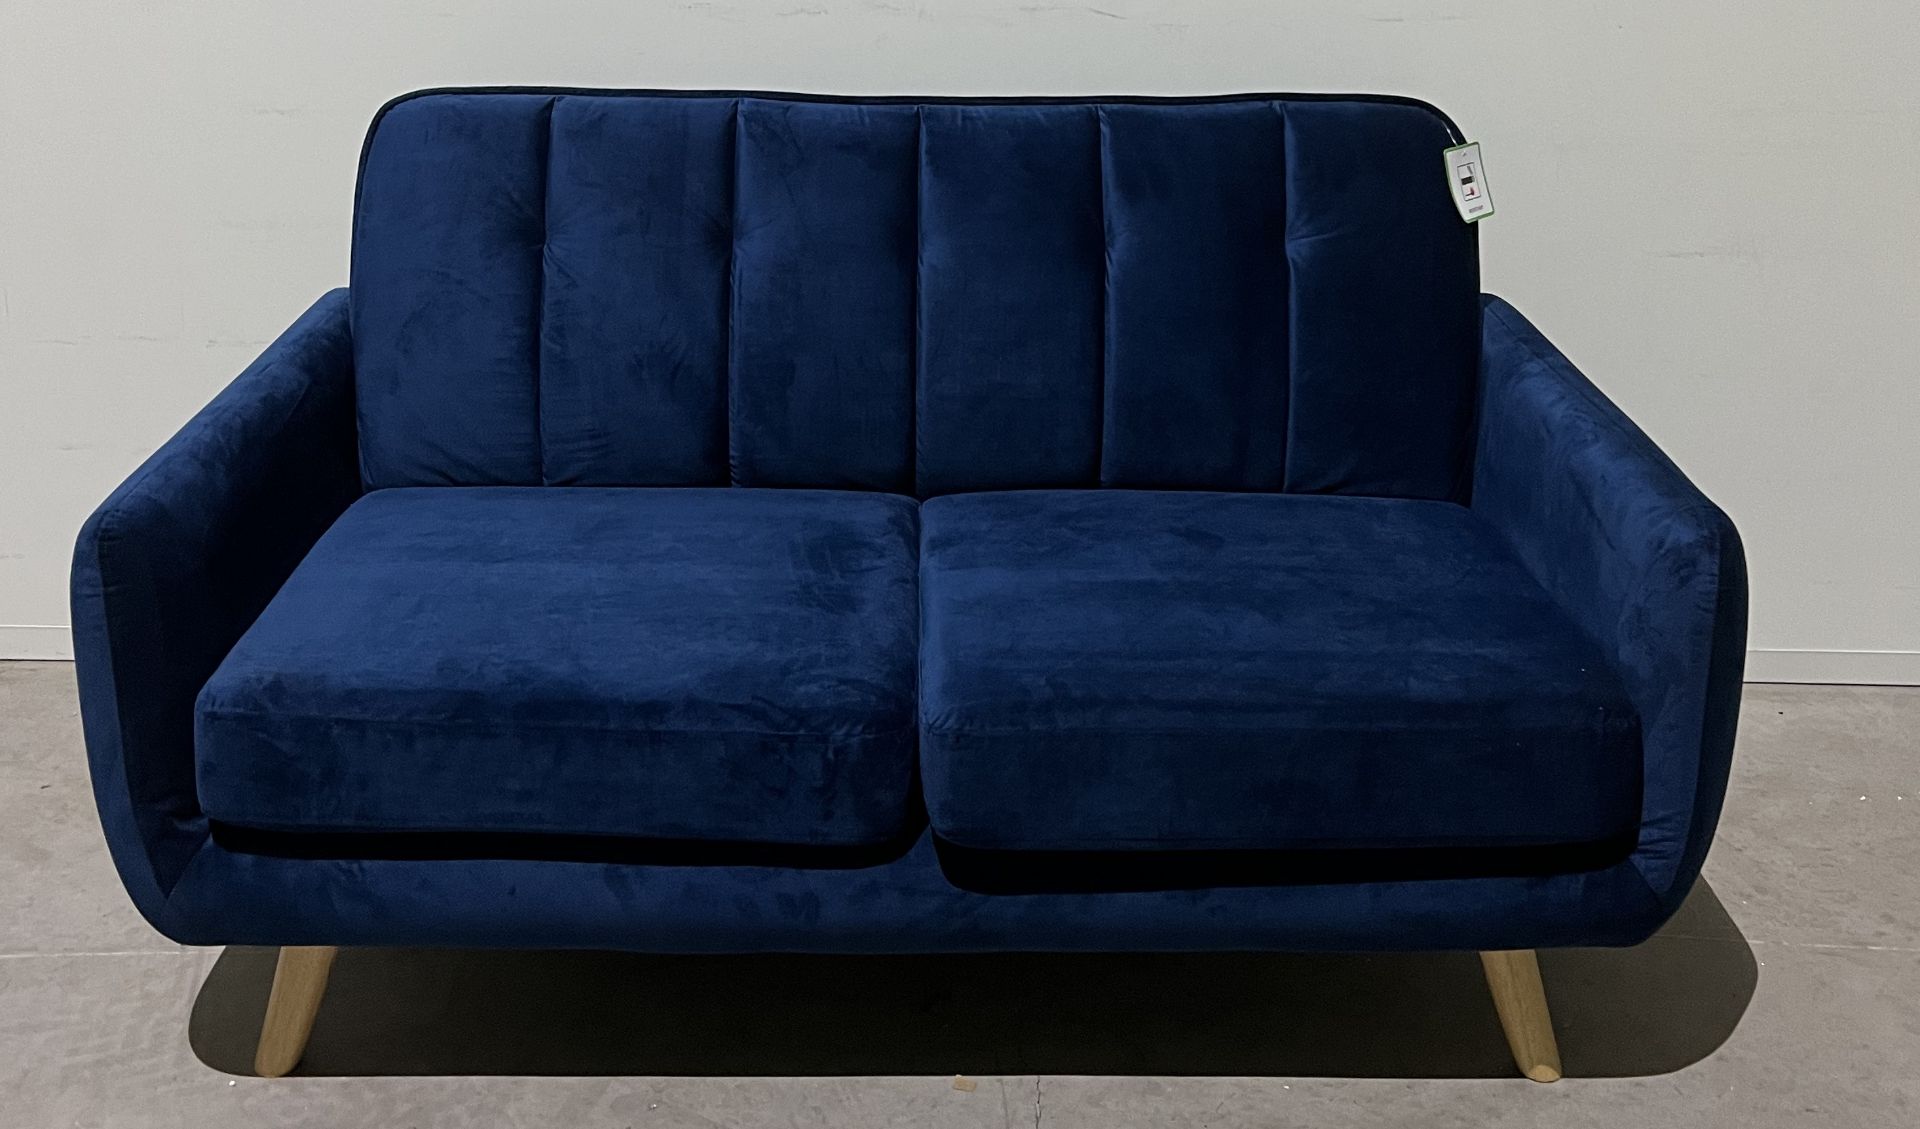 Camila Royal Blue Velvet Sofa Defined By It's Soft Curves And Low Rise Design As Well As Subtle